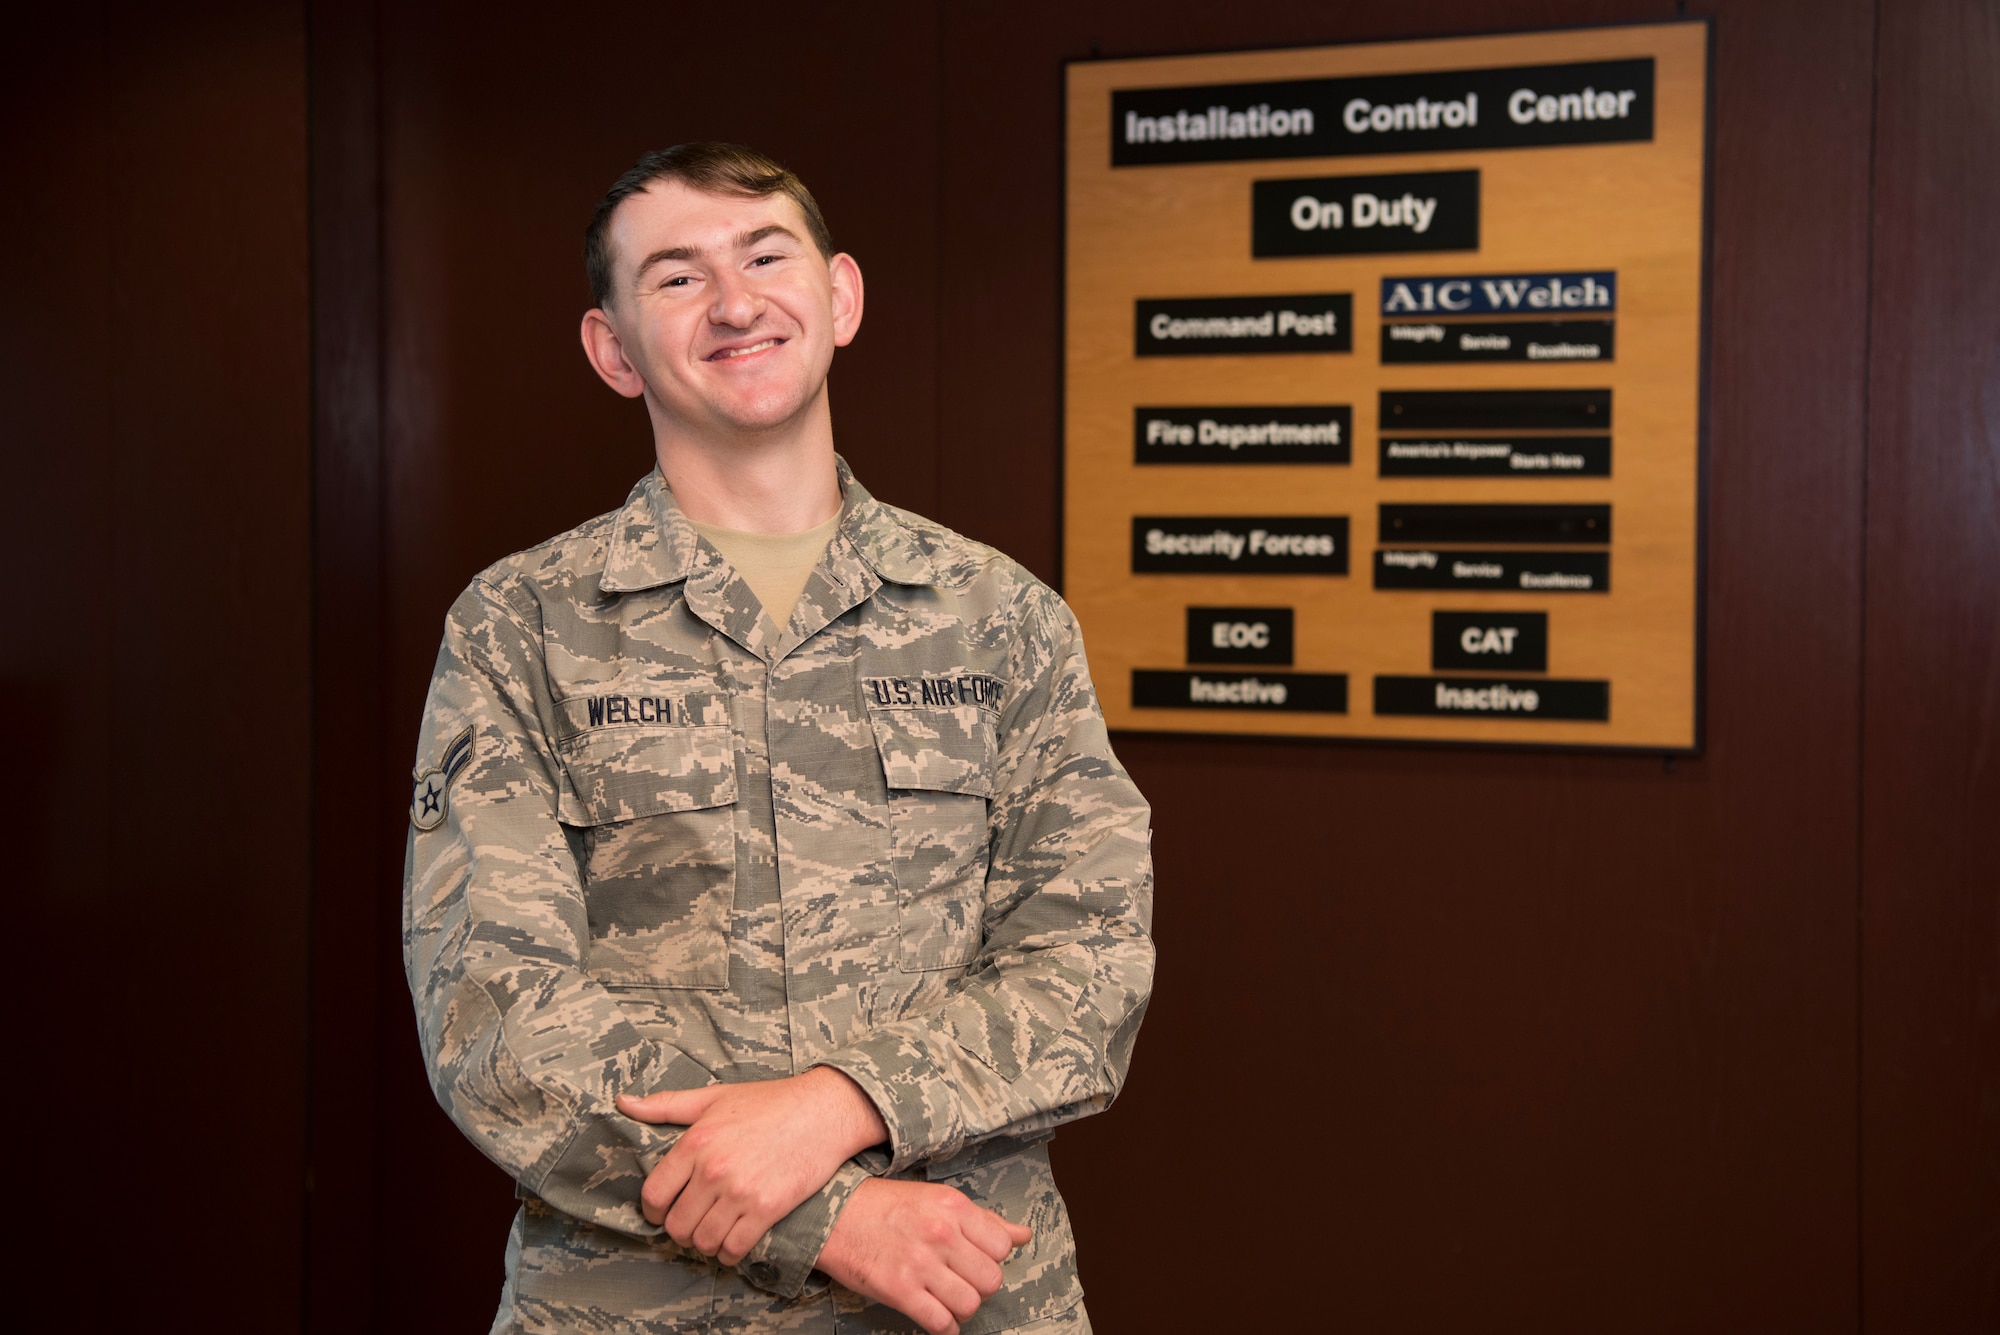 Airman 1st Class Justin Welch, 47th Flying Training Wing Command Post emergency actions controller, poses outside command post for a photo at Laughlin Air Force Base, May 28, 2019. Welch has not only earned the “XLer of the week” award but two Base Airmen Against Drunk Driving volunteer awards as well as the 47th Wing Staff Agencies Airman of the third quarter in 2018. (U.S. Air Force photo by Airman 1st Class Marco A. Gomez)